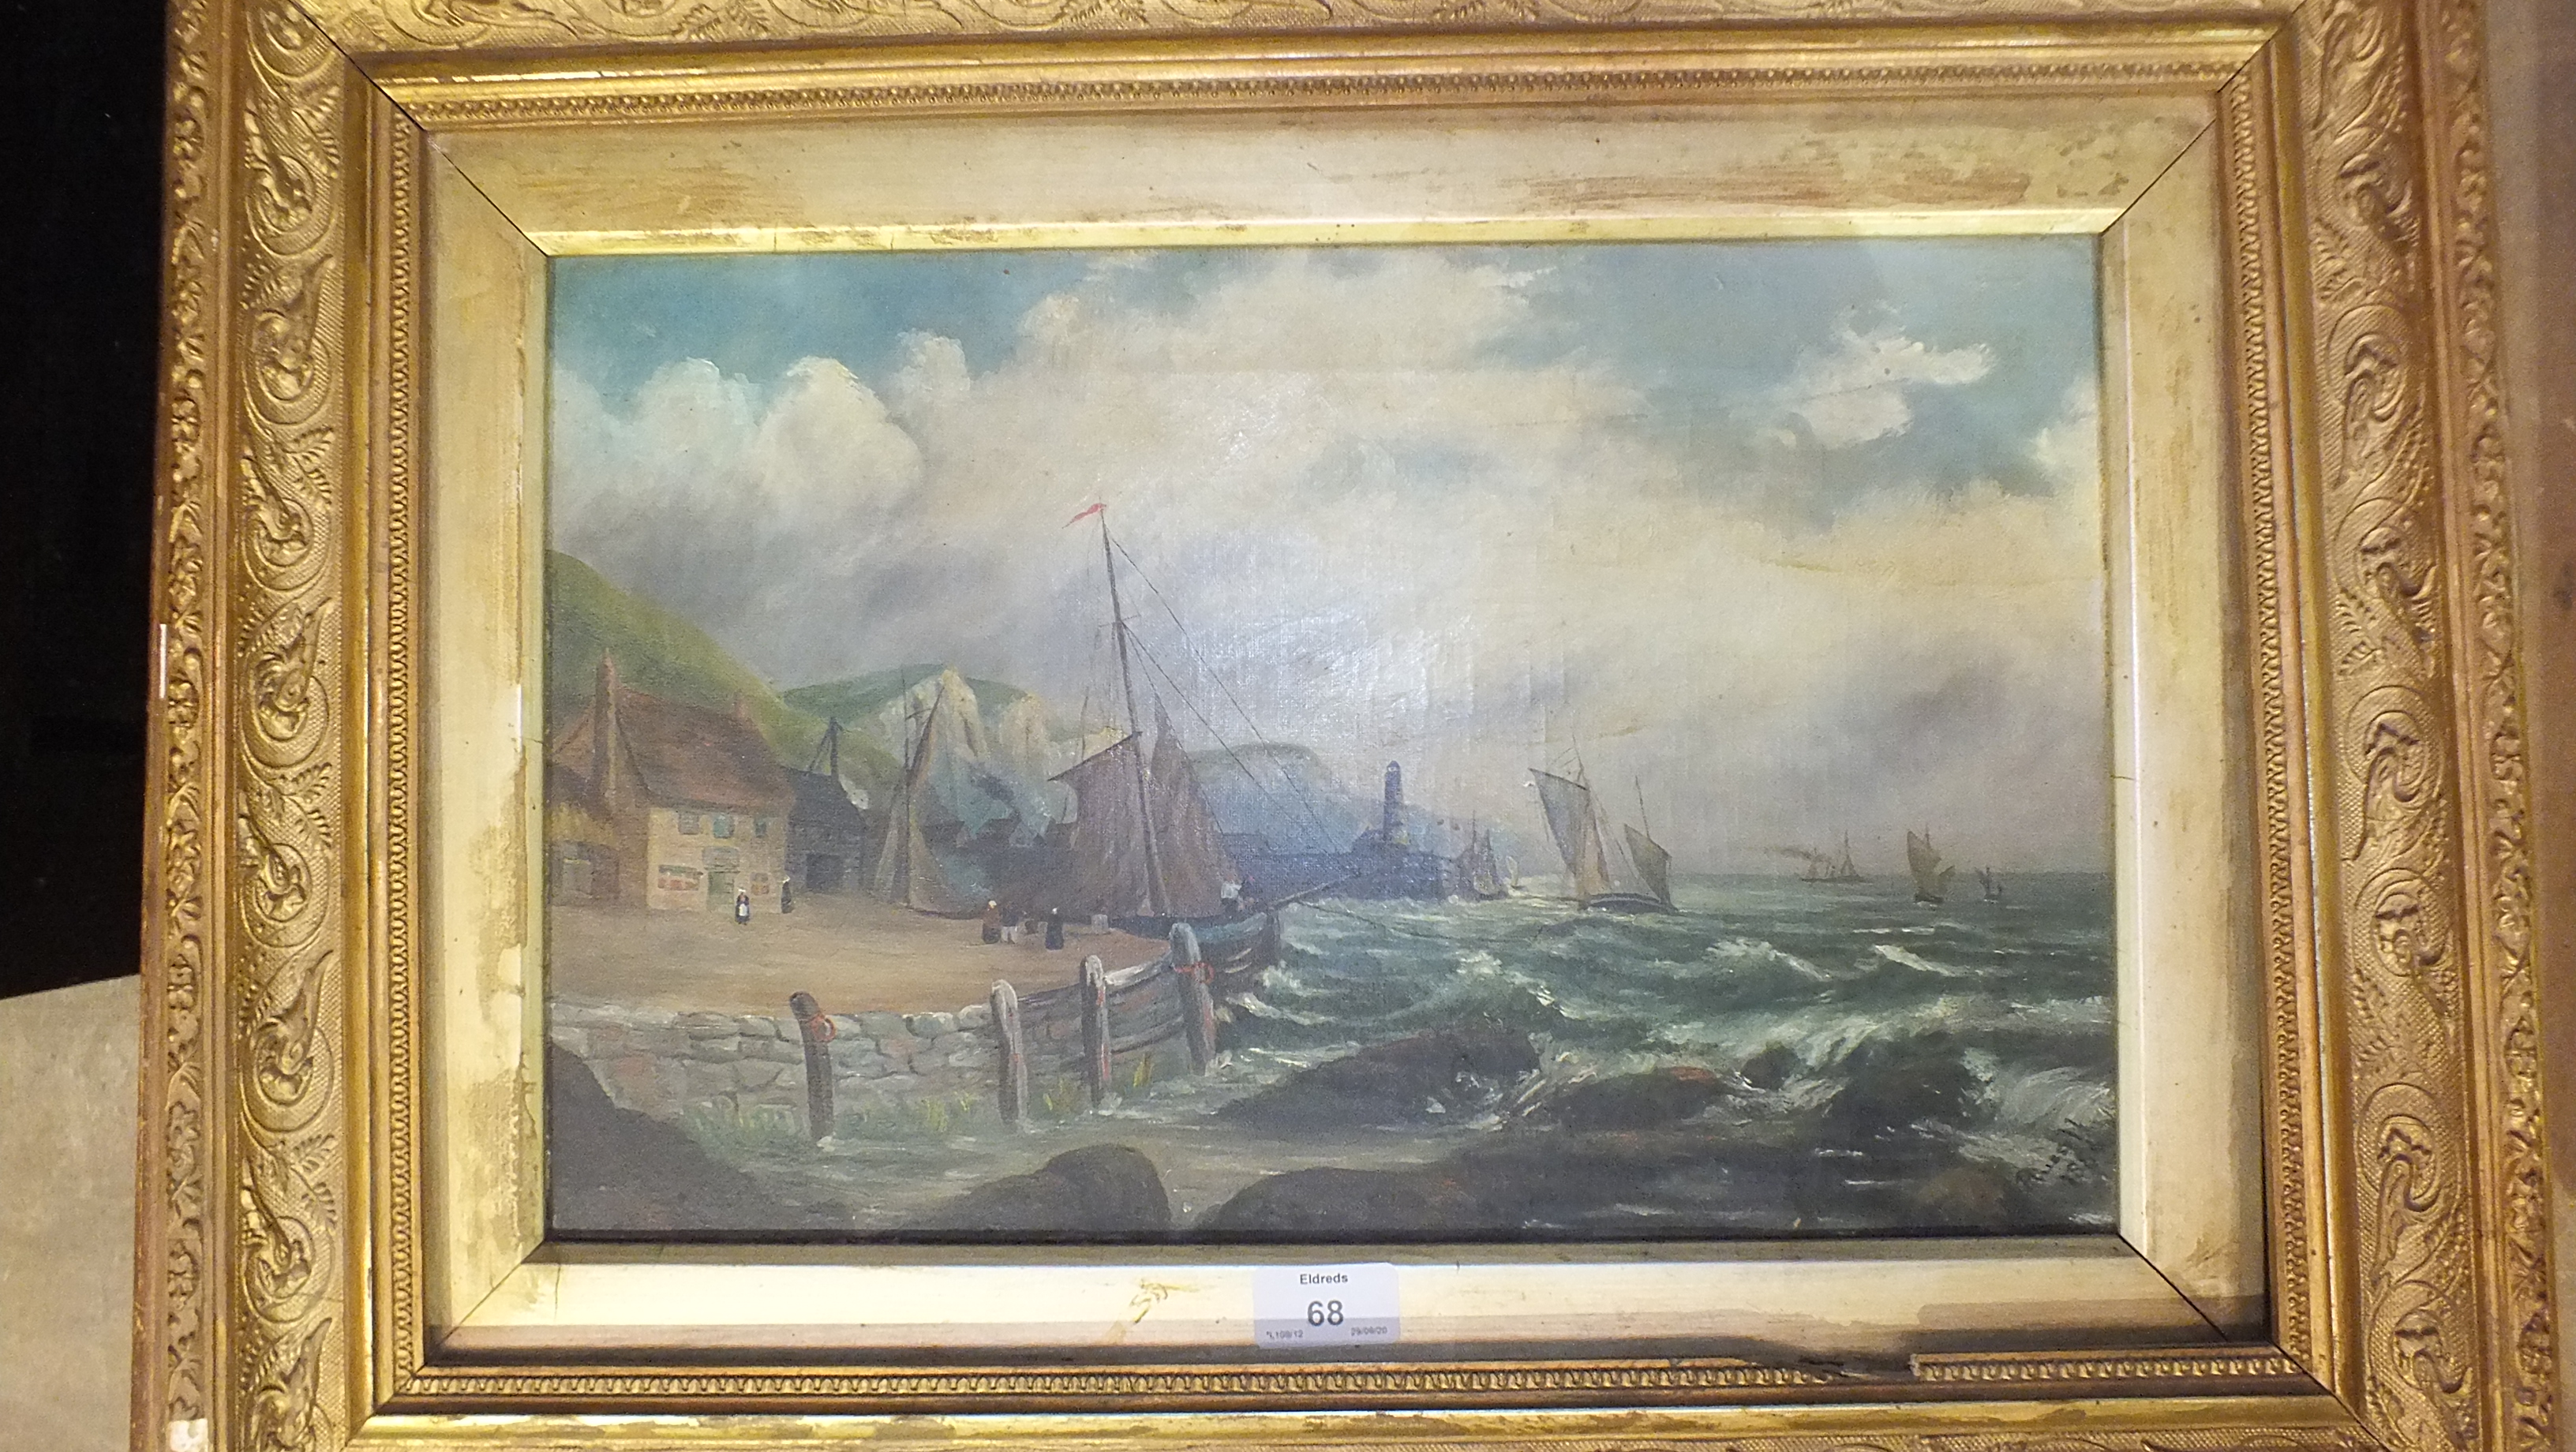 M Russell, 'Coastal scene with vessels', oil on canvas, signed and dated 1886, 26 x 42cm and a